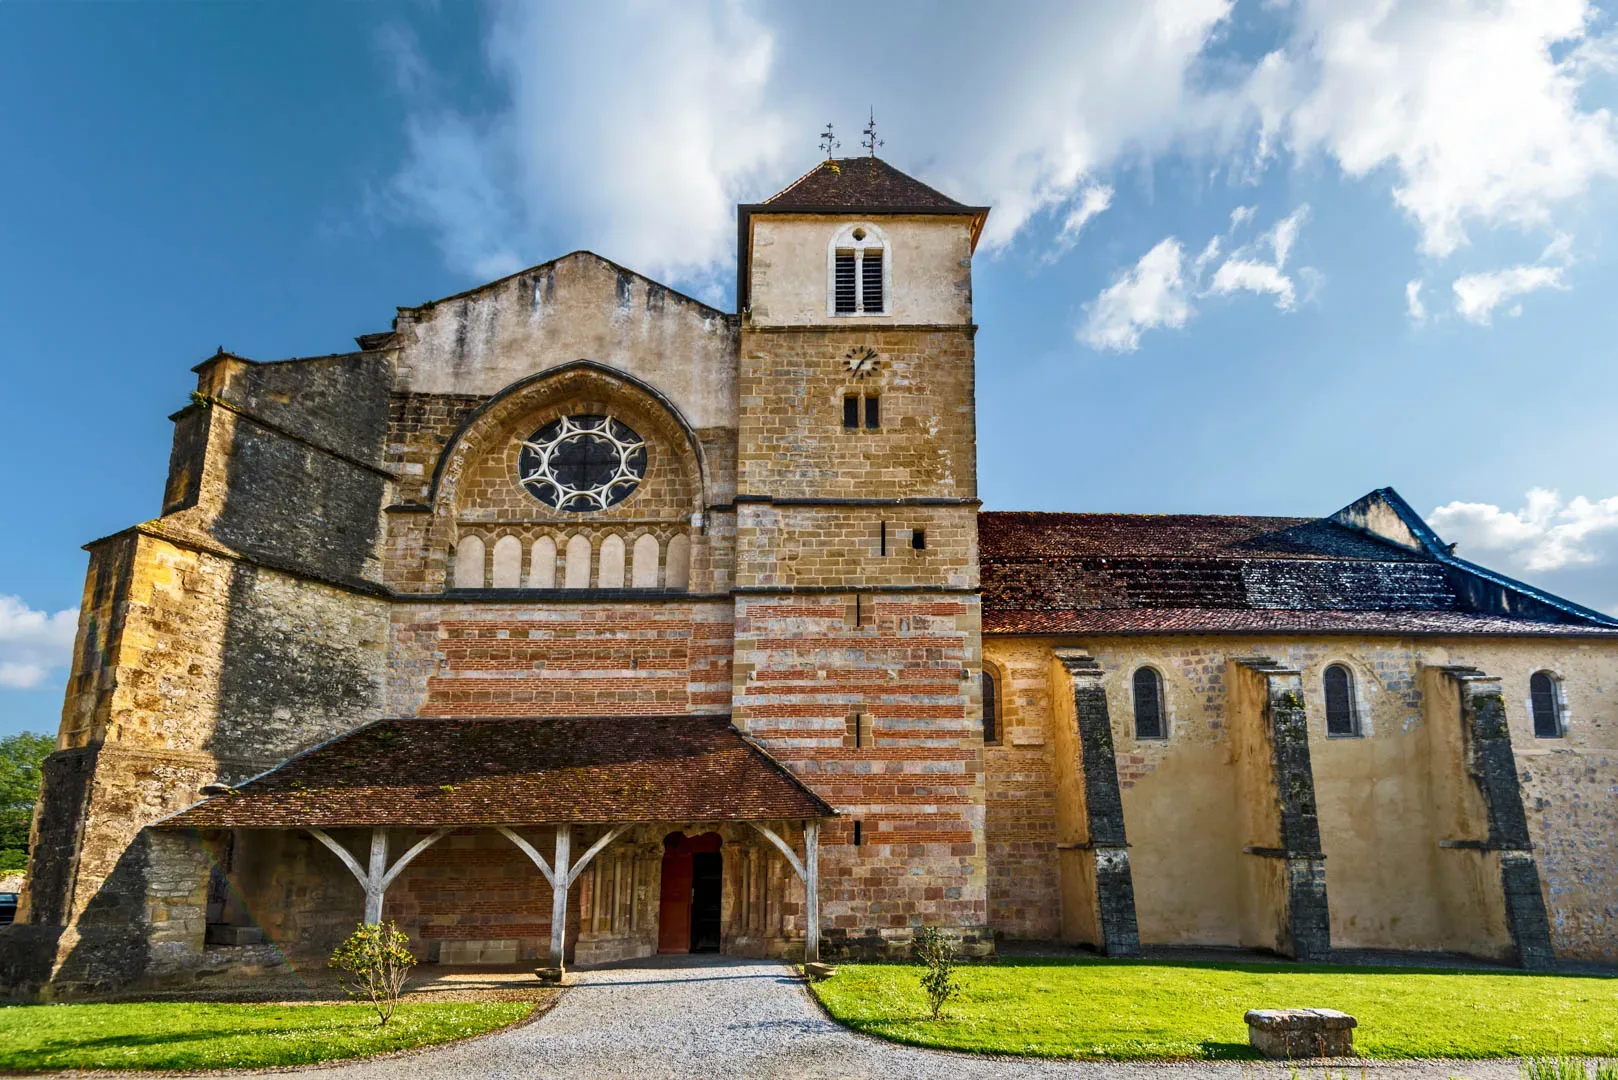 Frontal View At Medieval Abbey Of Saint Jean De Sorde, The Impor